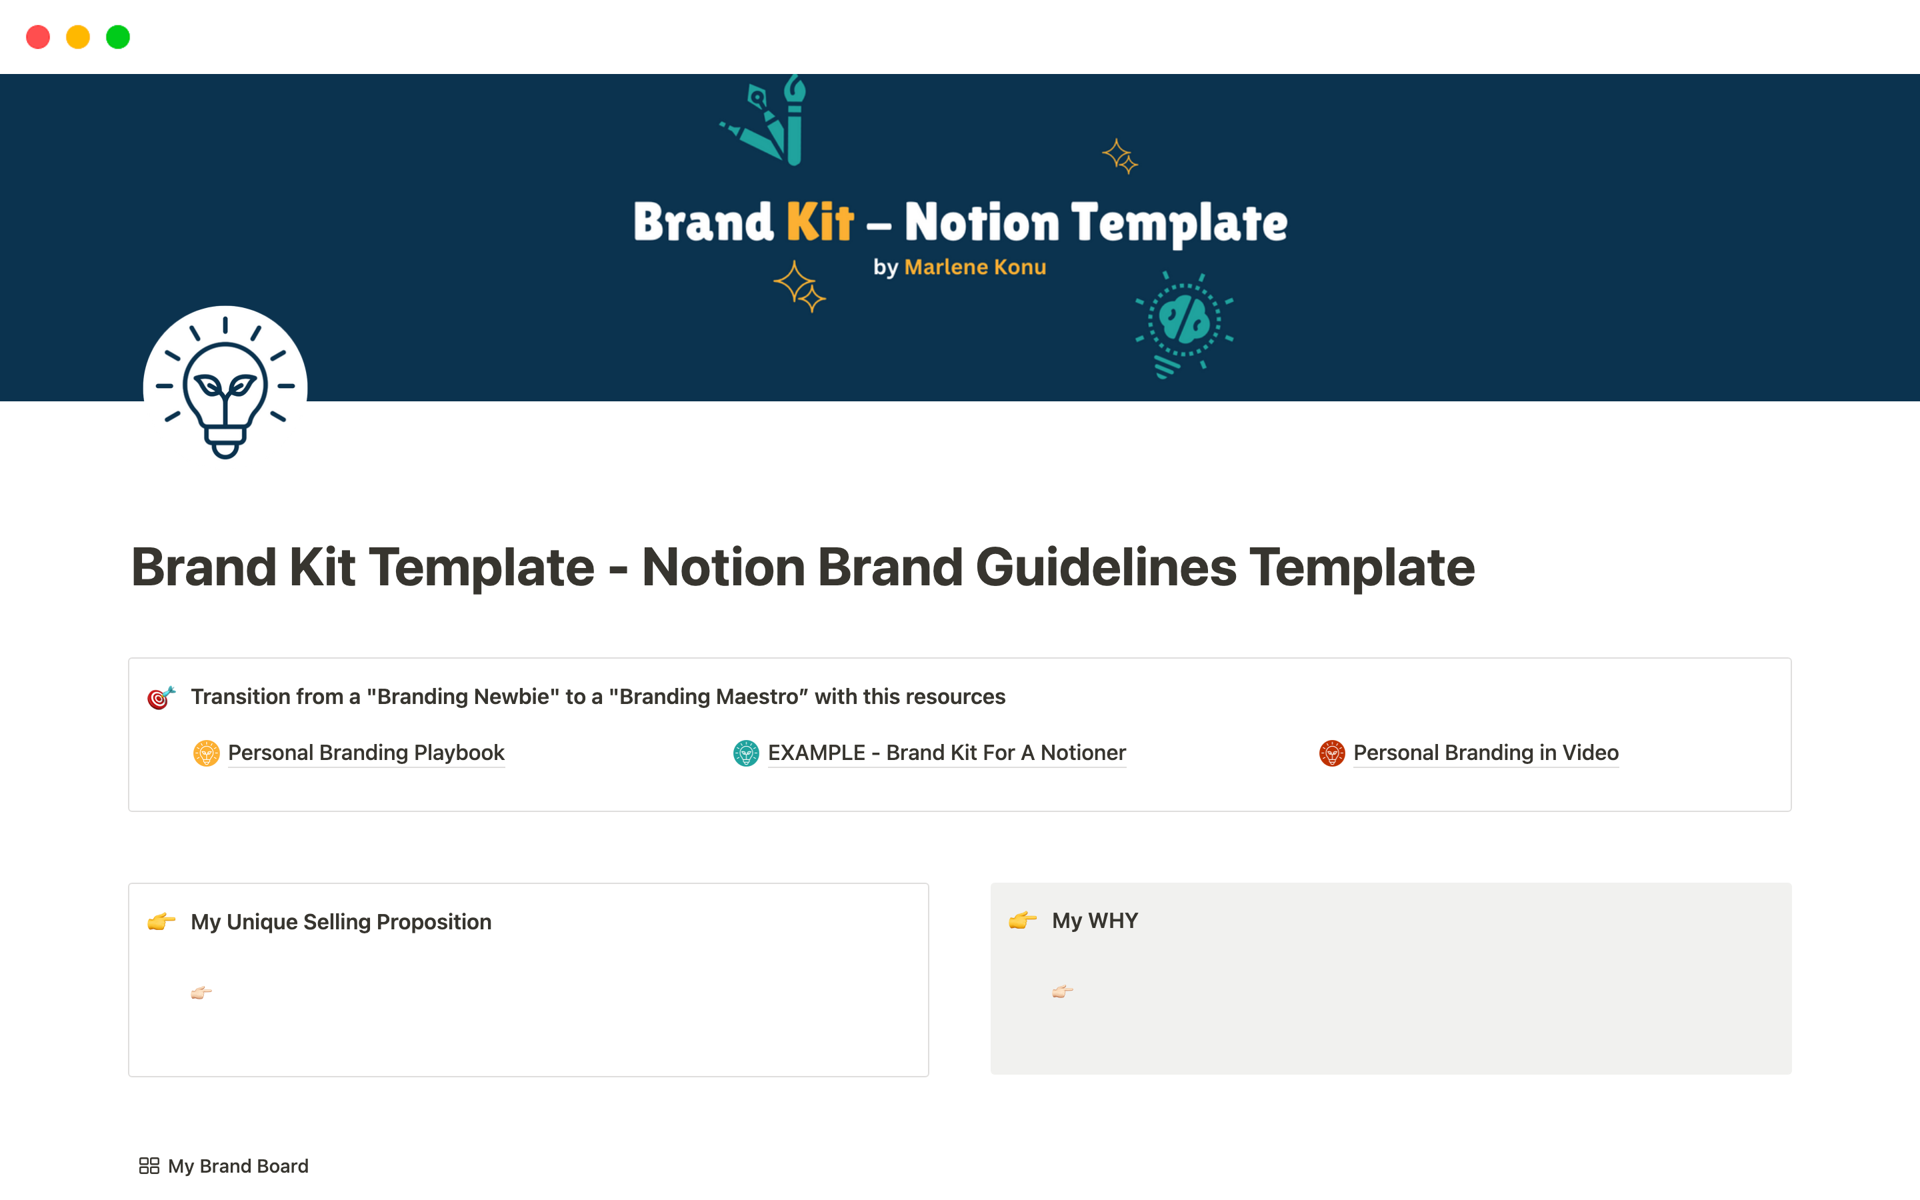 Unleash Your Personal Brand's Potential for FREE with Notion's All-In-One Brand Kit Template